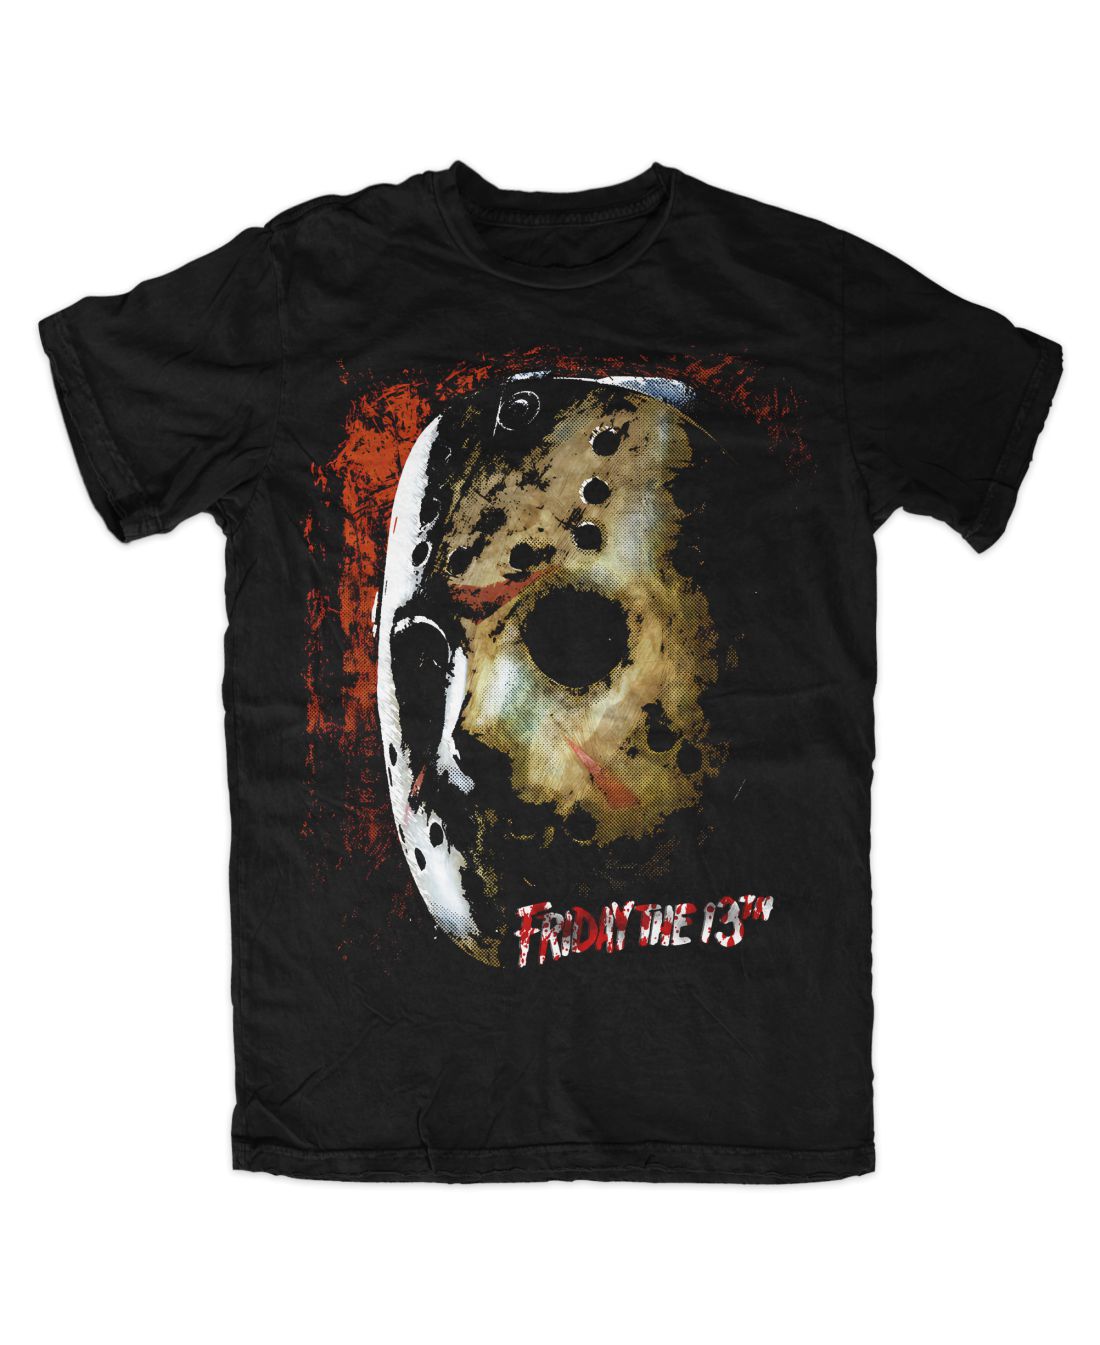 Friday The 13th 005